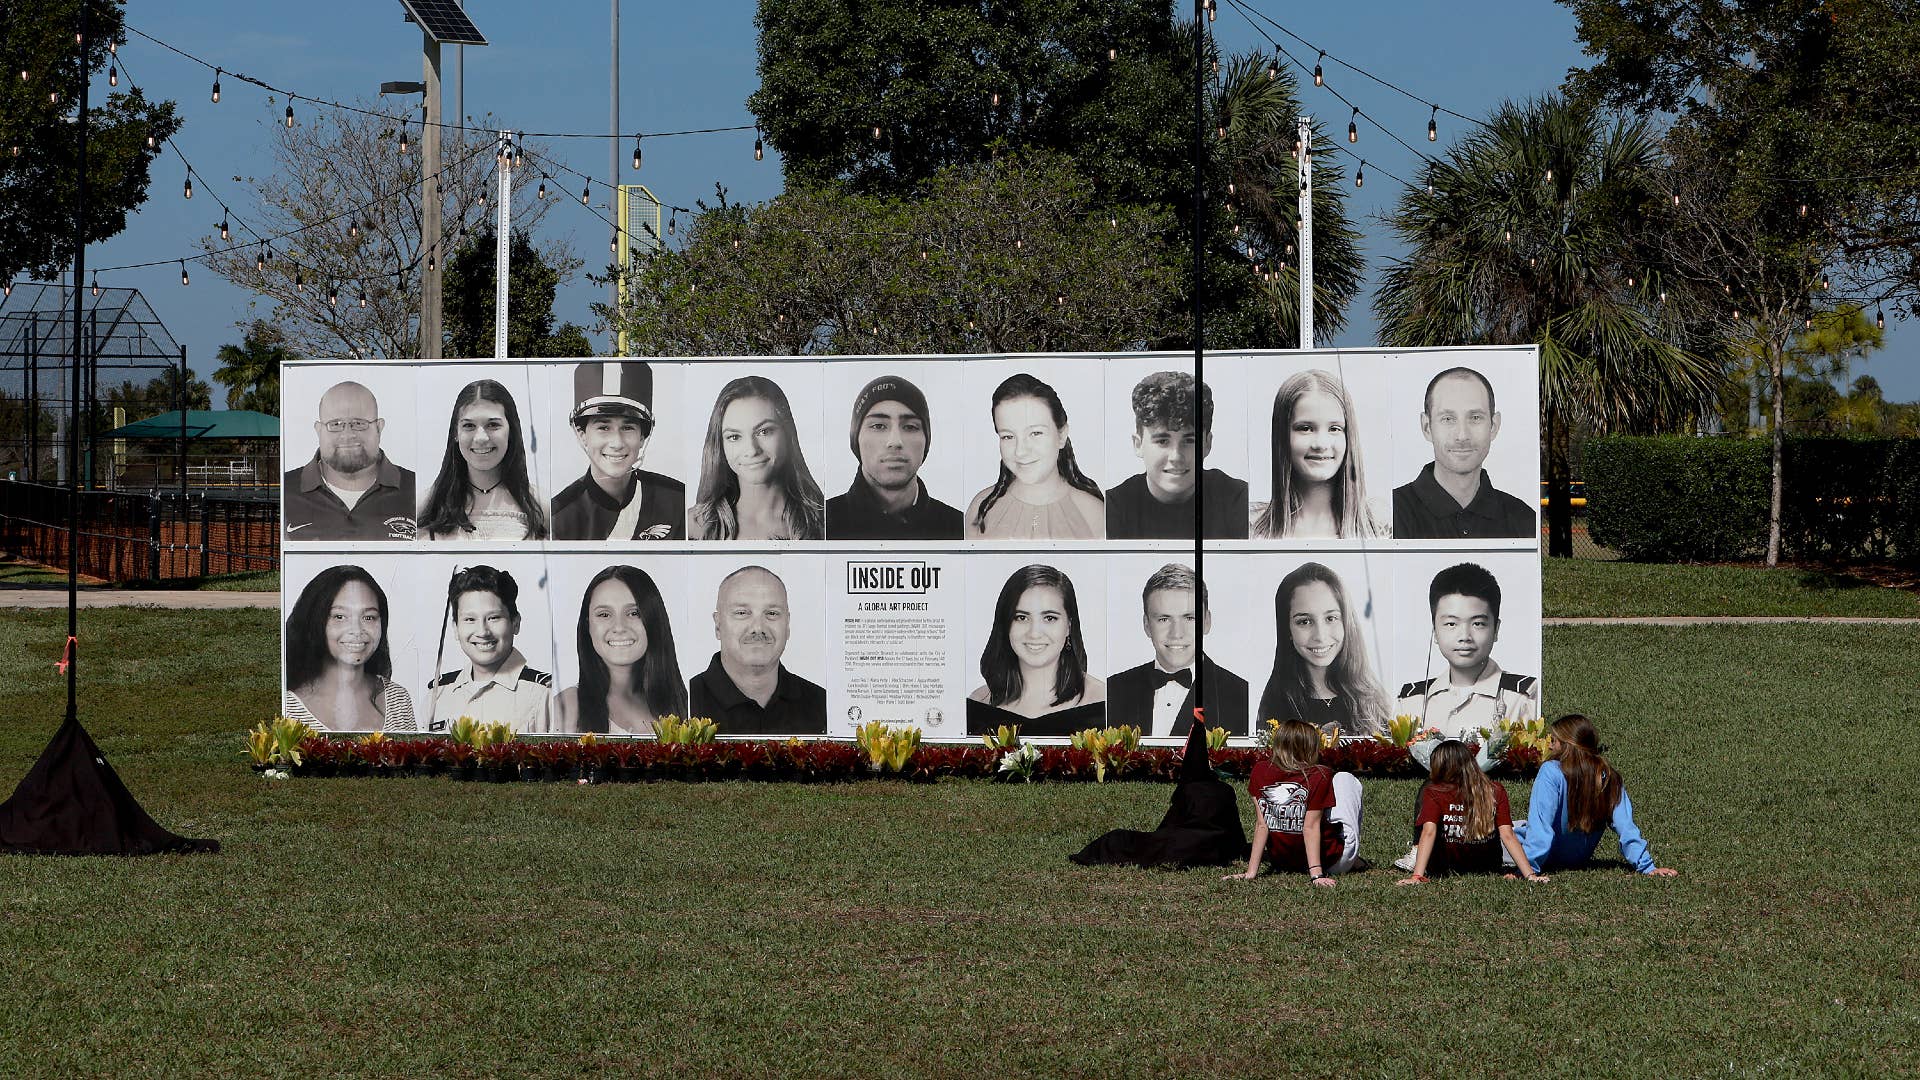 School shooting victims are memorialized with a tribute